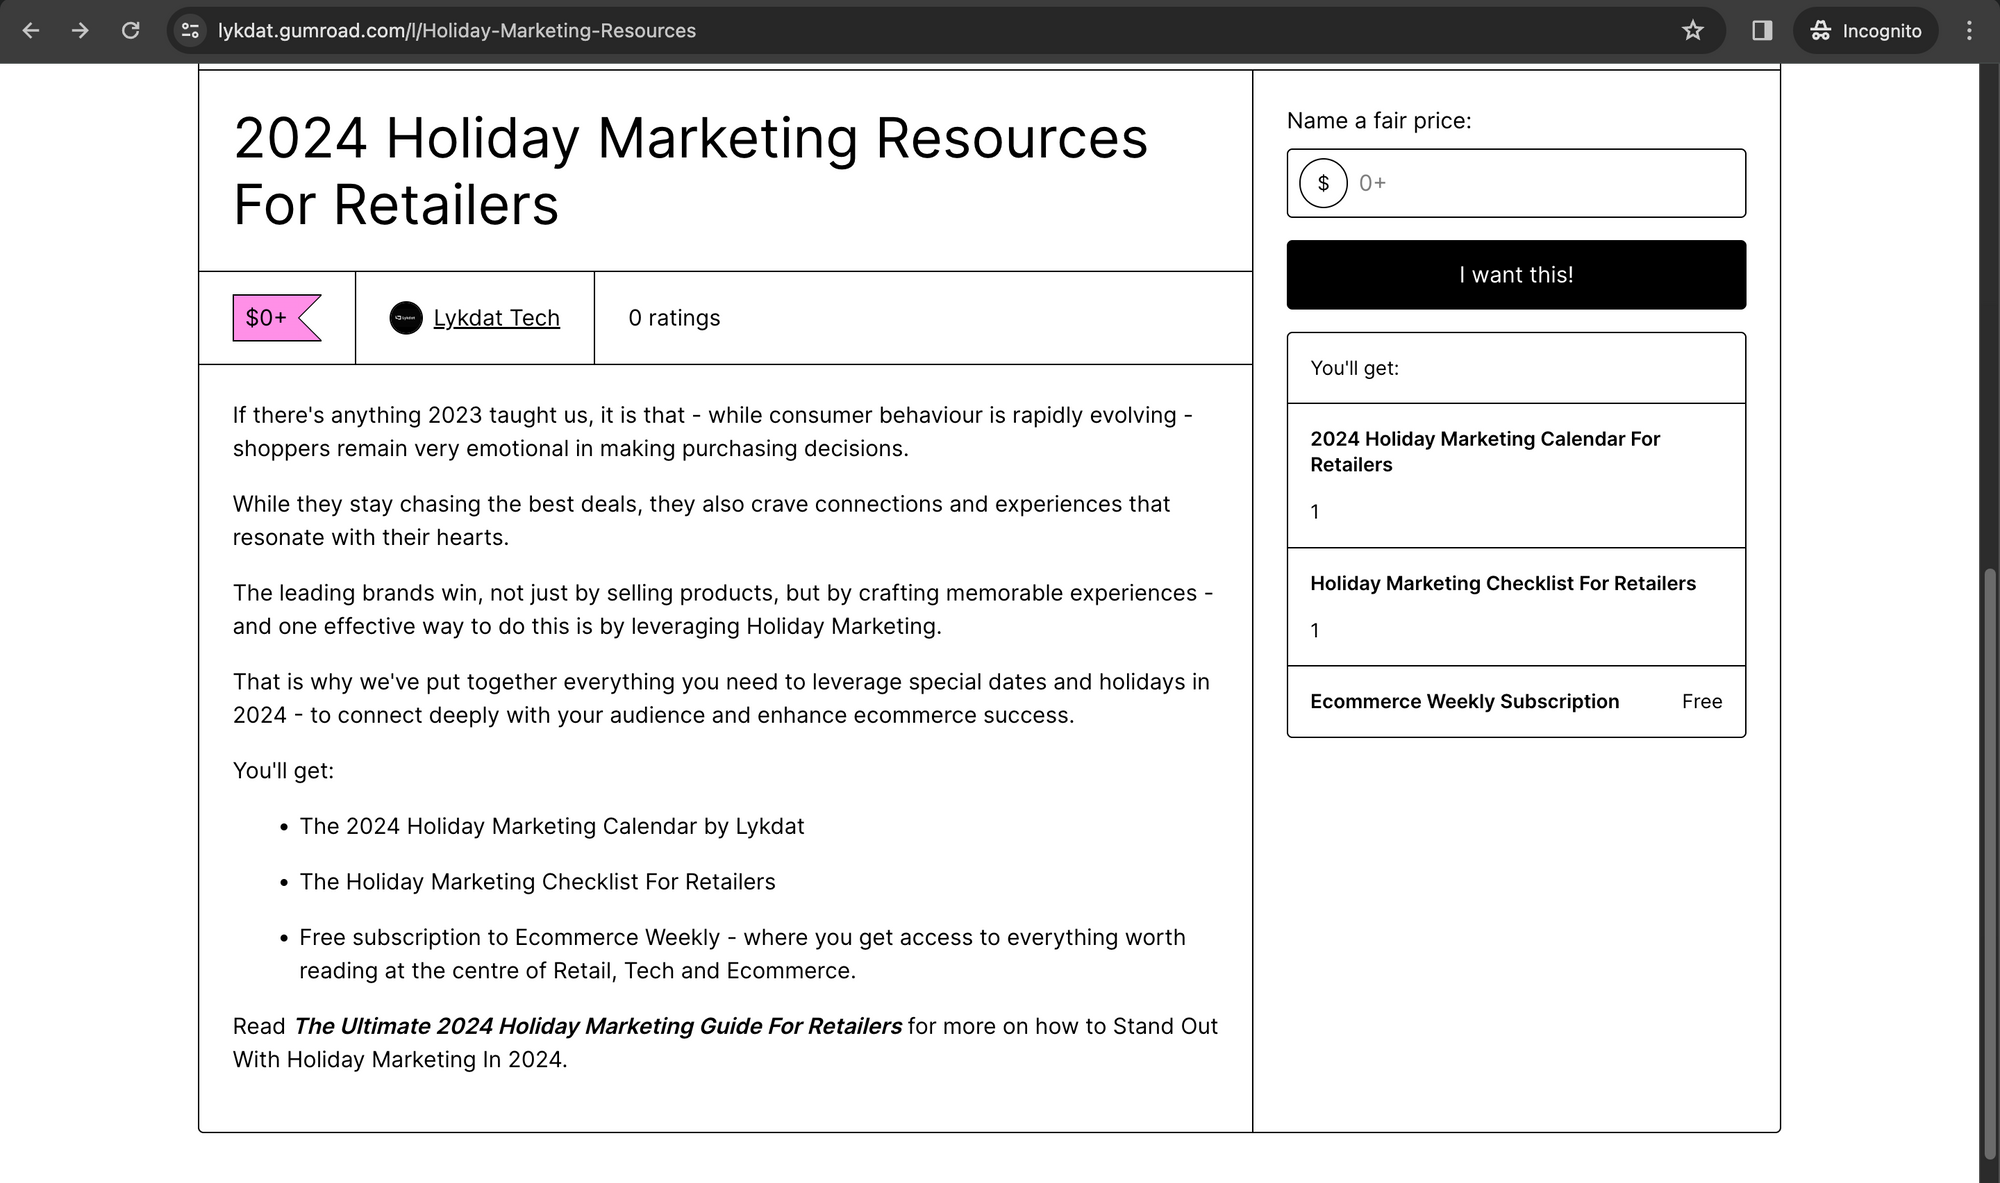 The Ultimate 2024 Holiday Marketing Guide